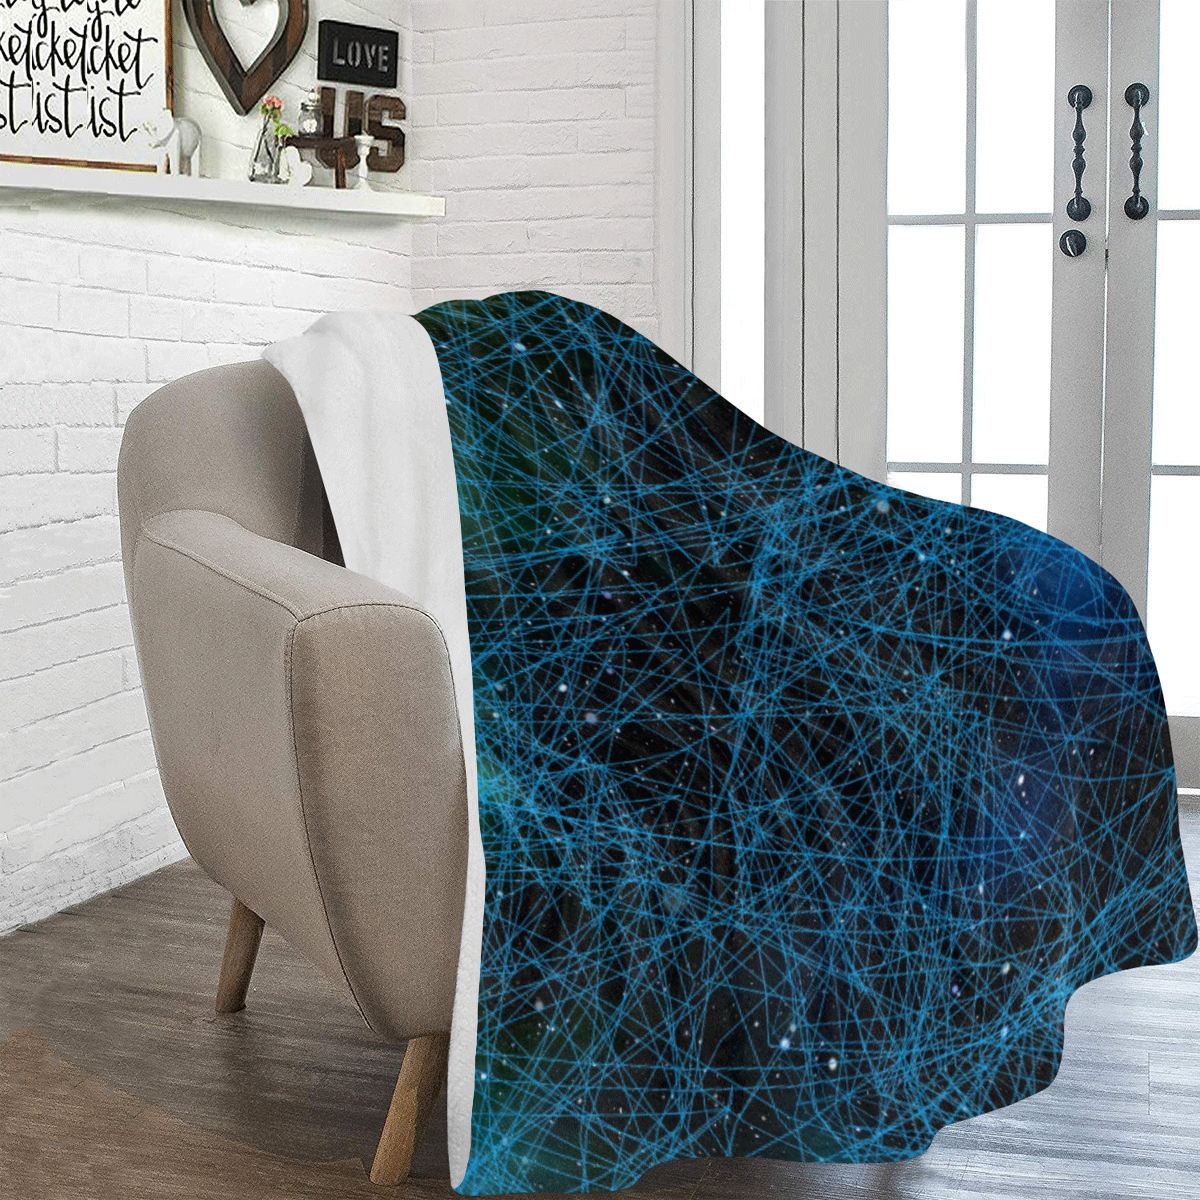 System Network Connection Ultra-Soft Micro Fleece Blanket 60"x80"